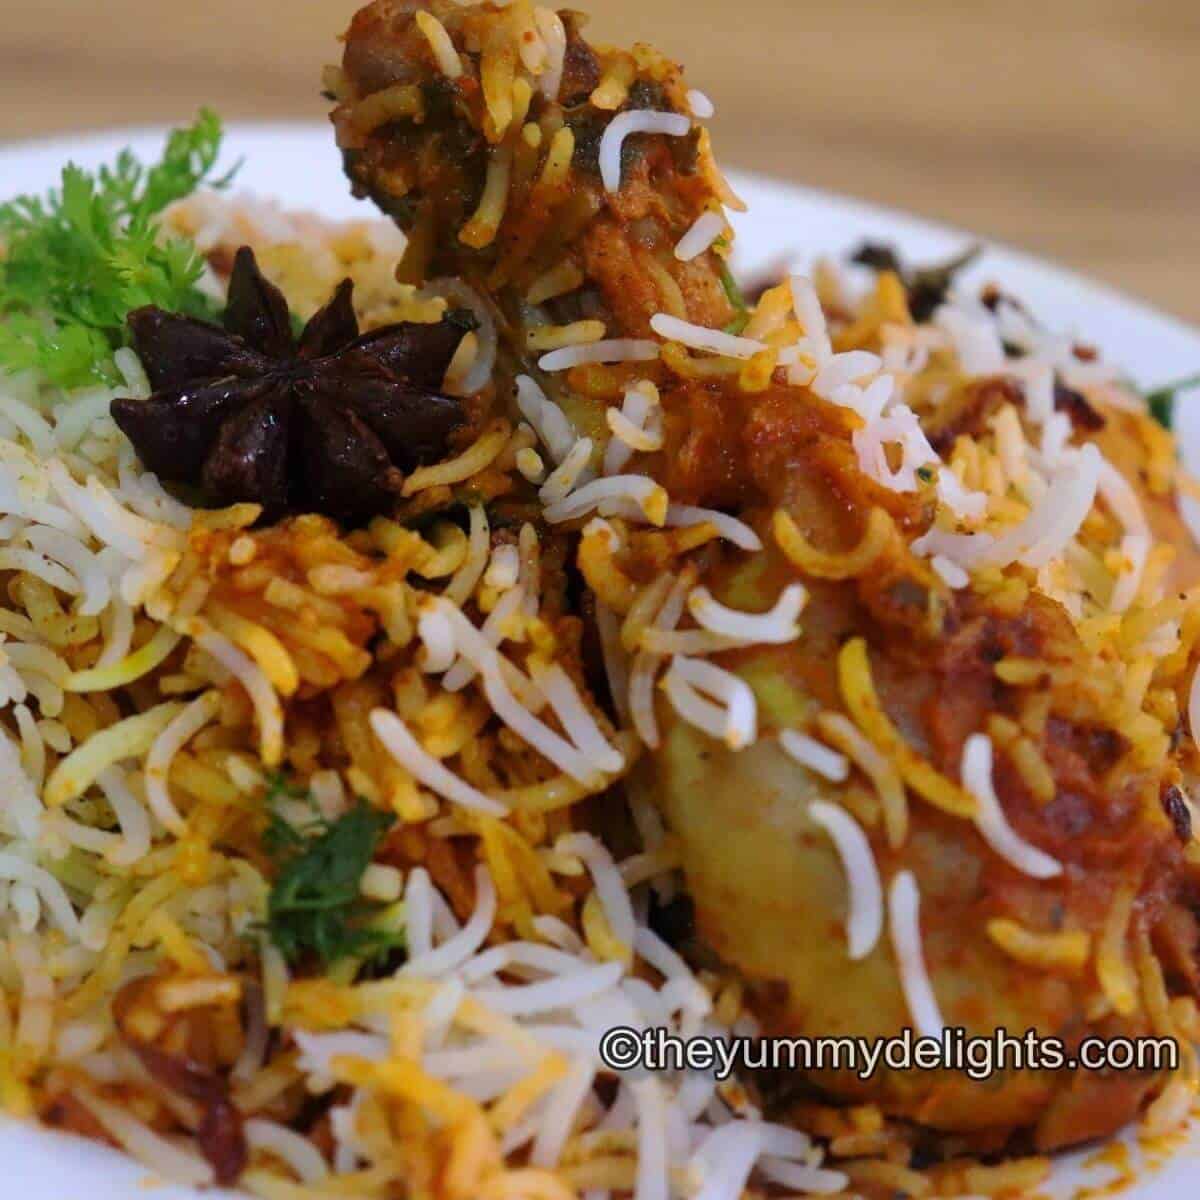 butter chicken biryani served in a white plate. Garnished with a star anise & coriander leaves,